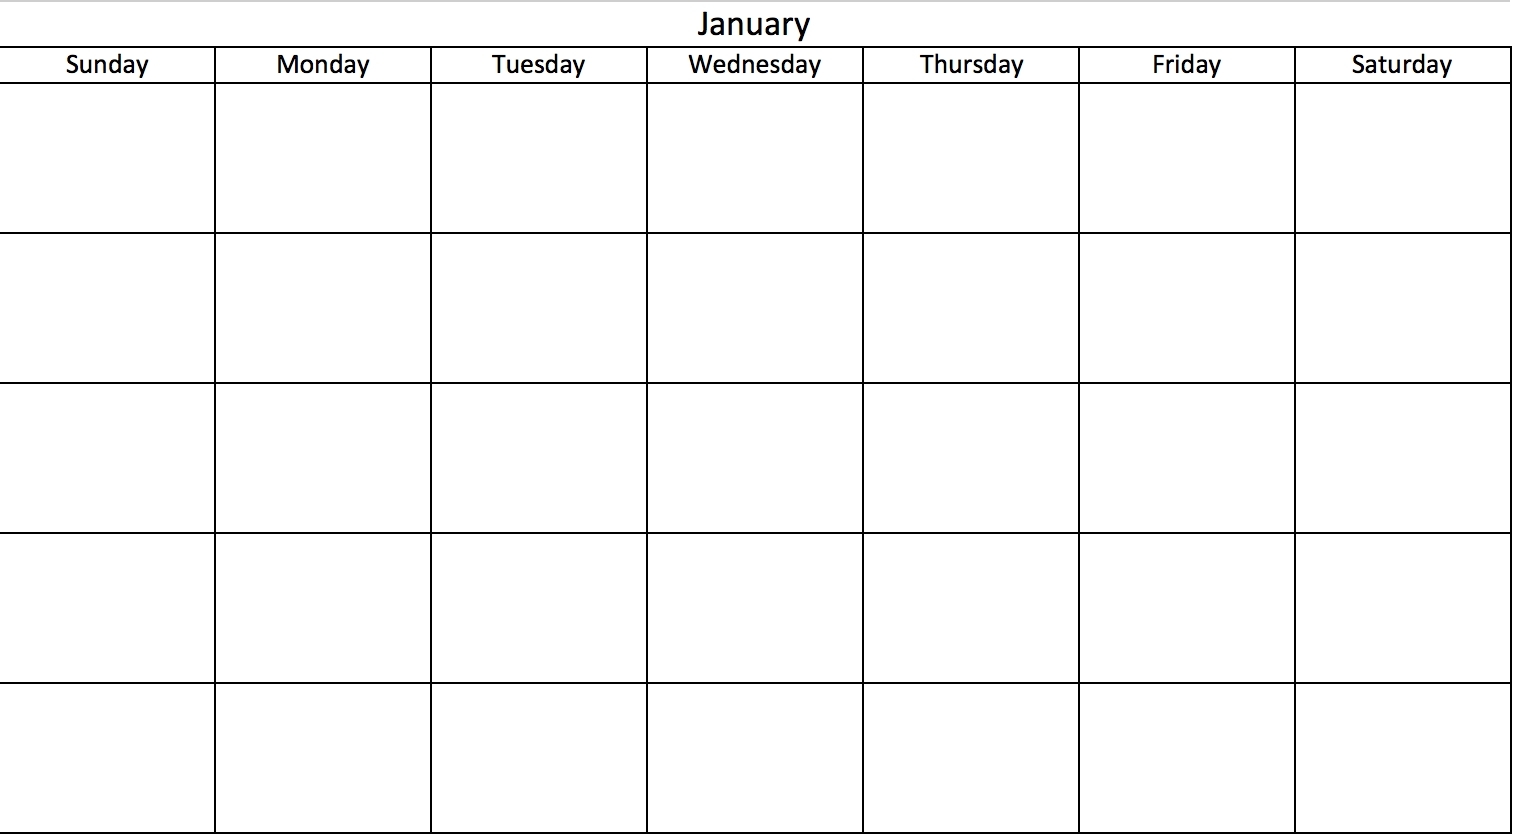 Schedule Template Weekday Calendar Printable Week Day Only Holidays in Blank Calendar With Only Weekdays